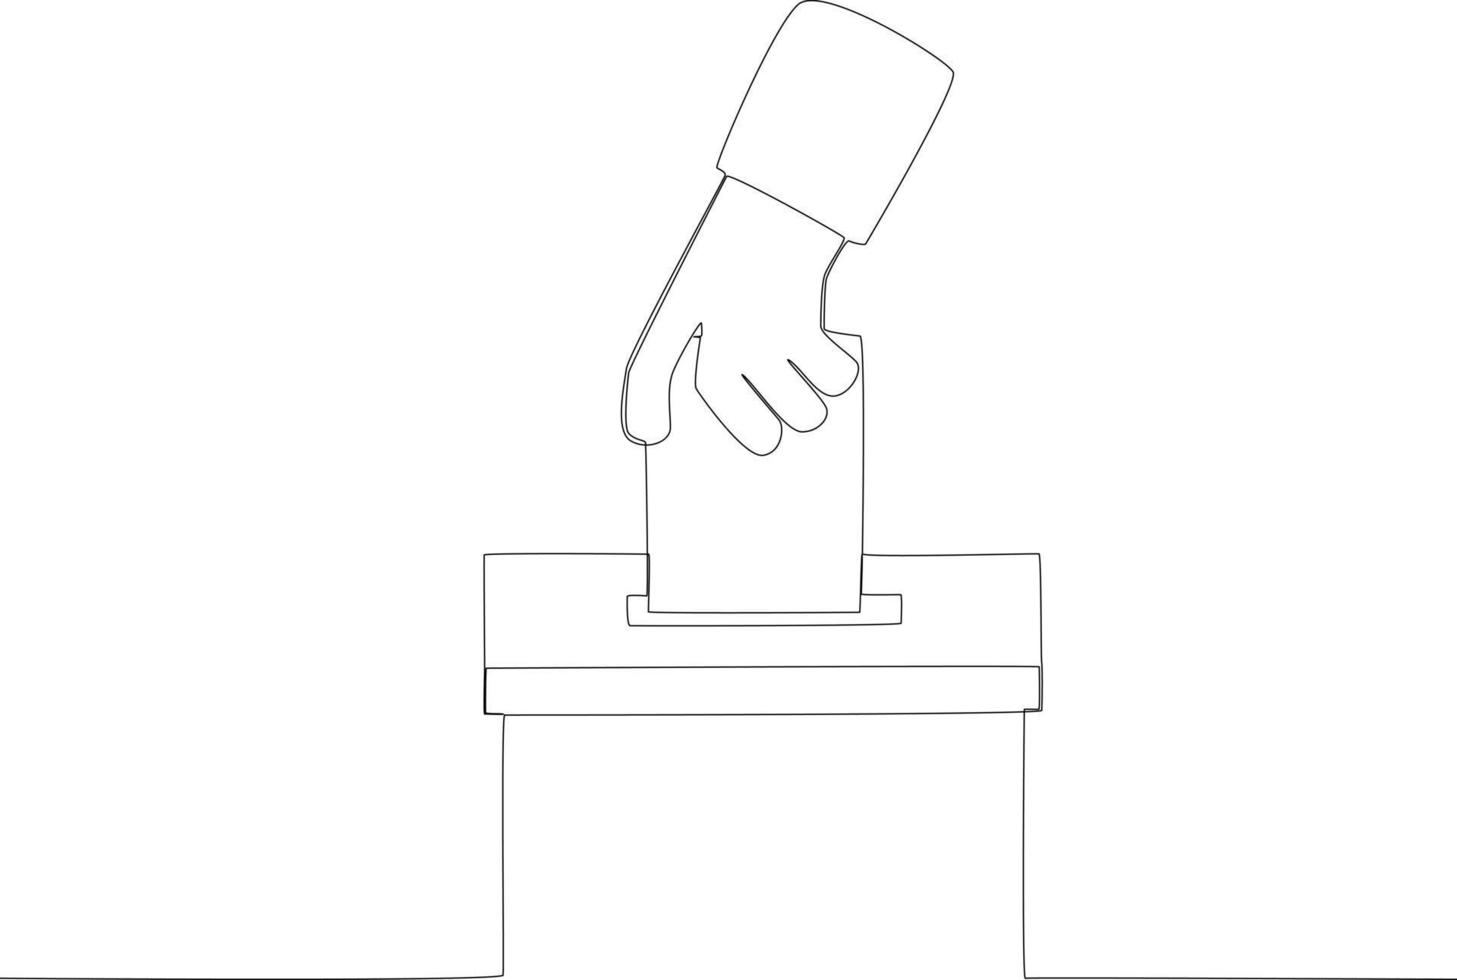 A hand stuffed the election envelope vector